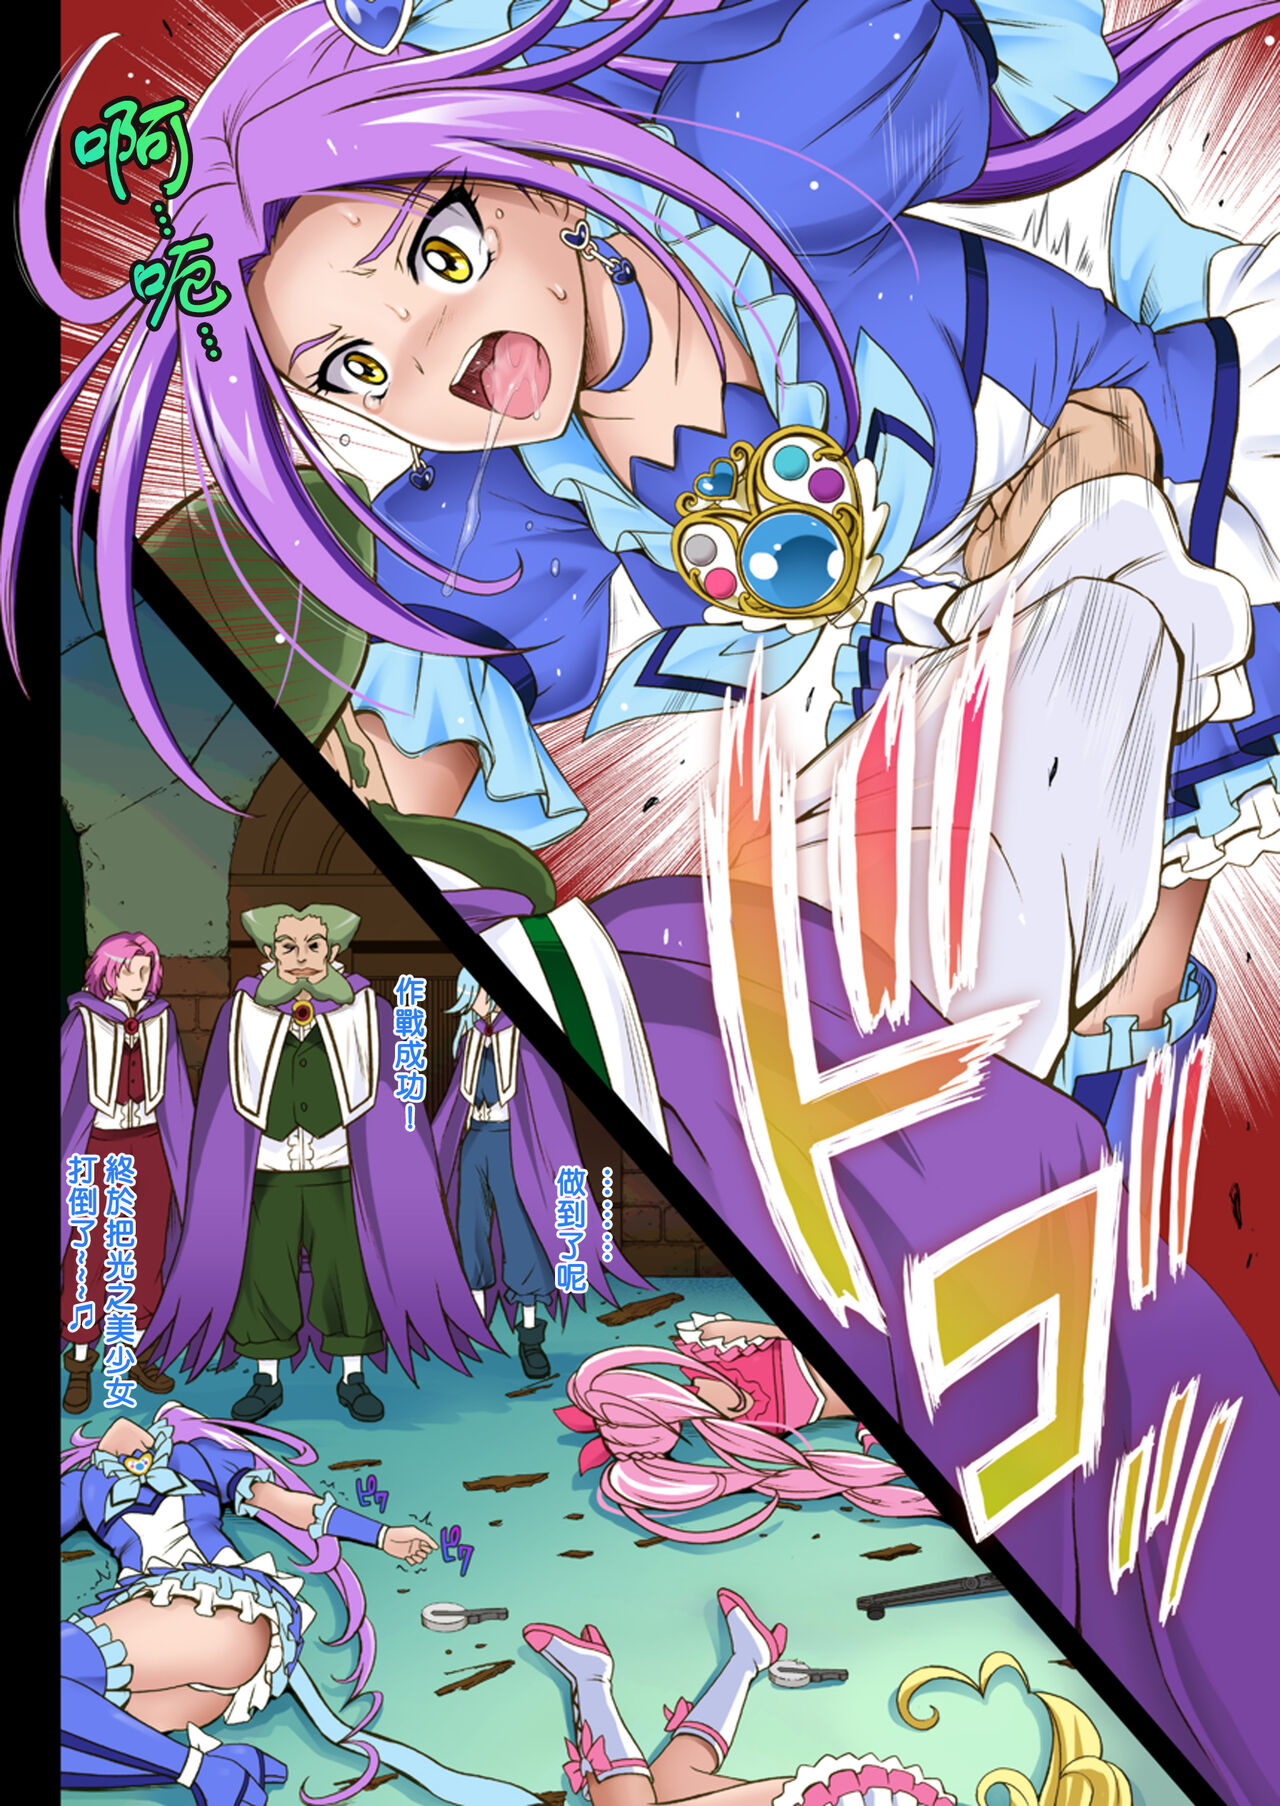 [Cyclone (Izumi, Reizei)] Cyclone no Full Color Pack1 "Sui-Sui" (Suite Precure) [Digital][Chinese][桃樹漢化組×流砂個人漢化] [サイクロン (和泉、冷泉)] サイクロンのフルカラーパック1「Sui-Sui」 (スイートプリキュア♪) [DL版][中国翻訳]